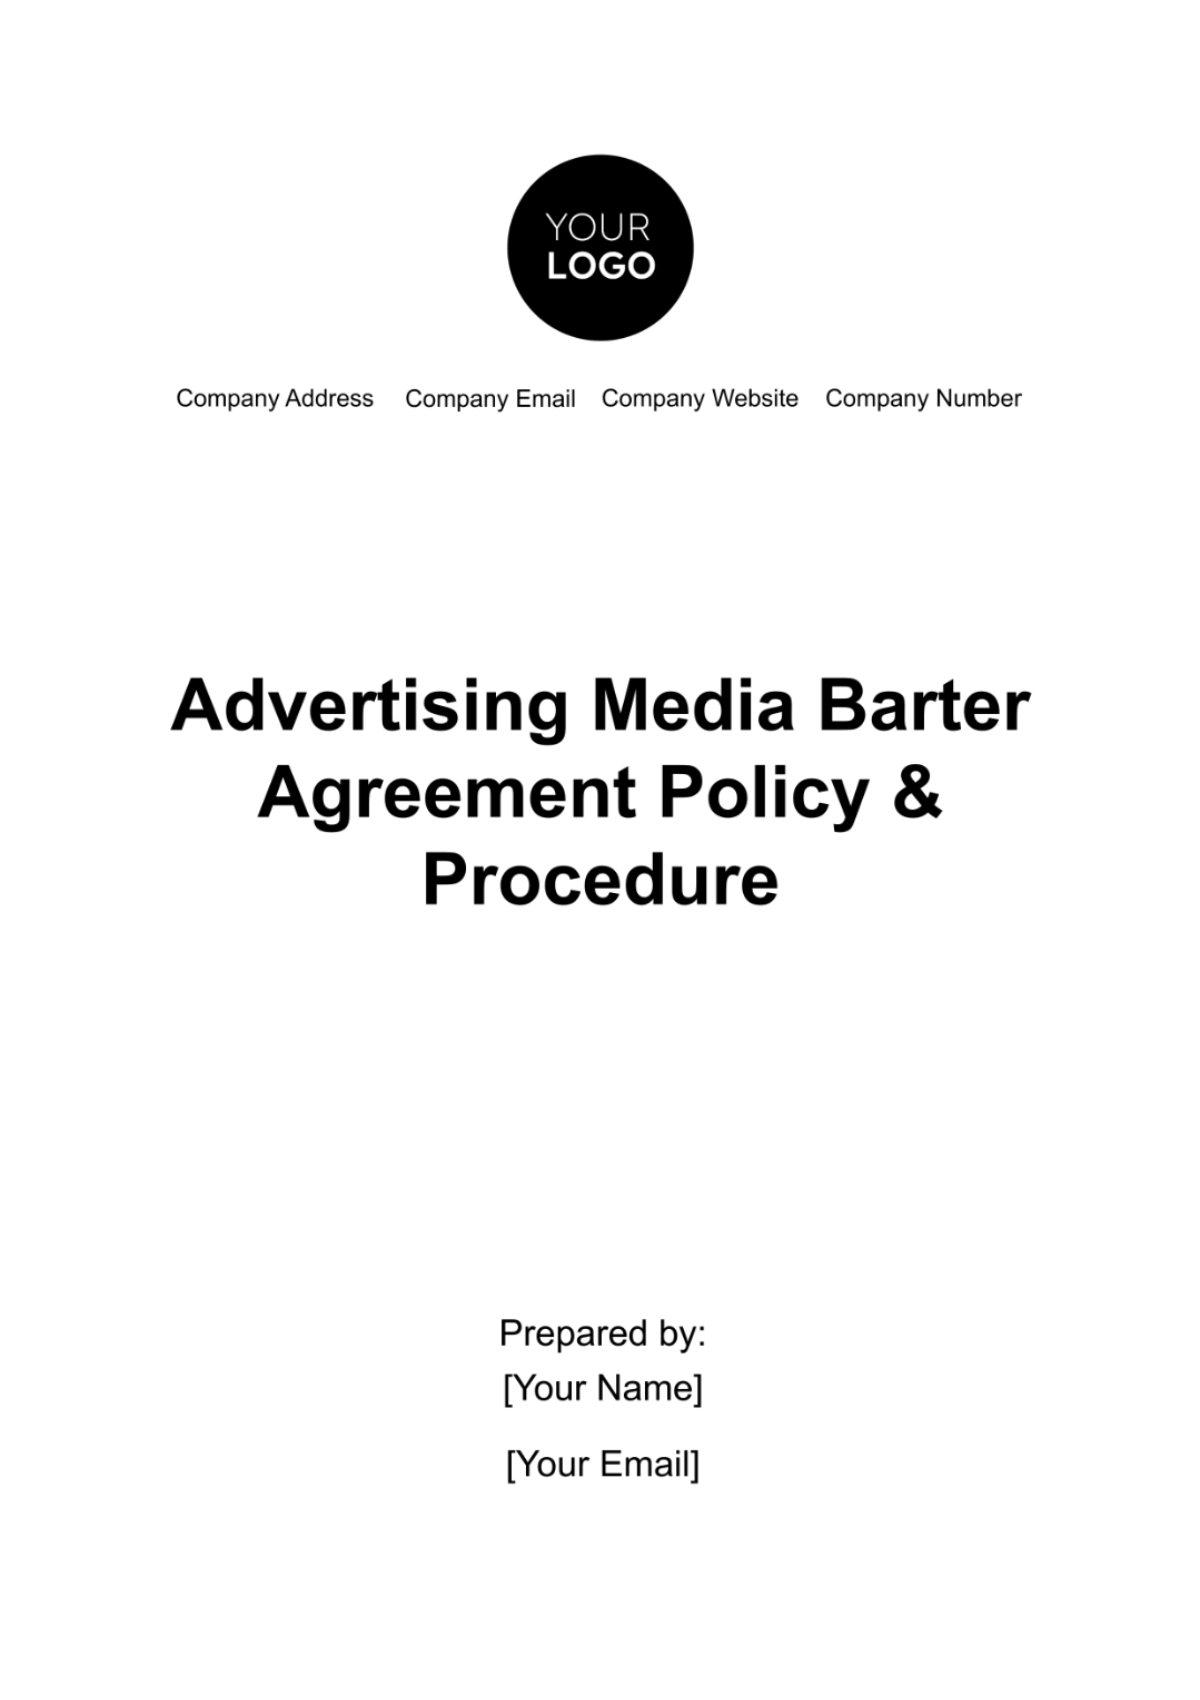 Advertising Media Barter Agreement Policy & Procedure Template